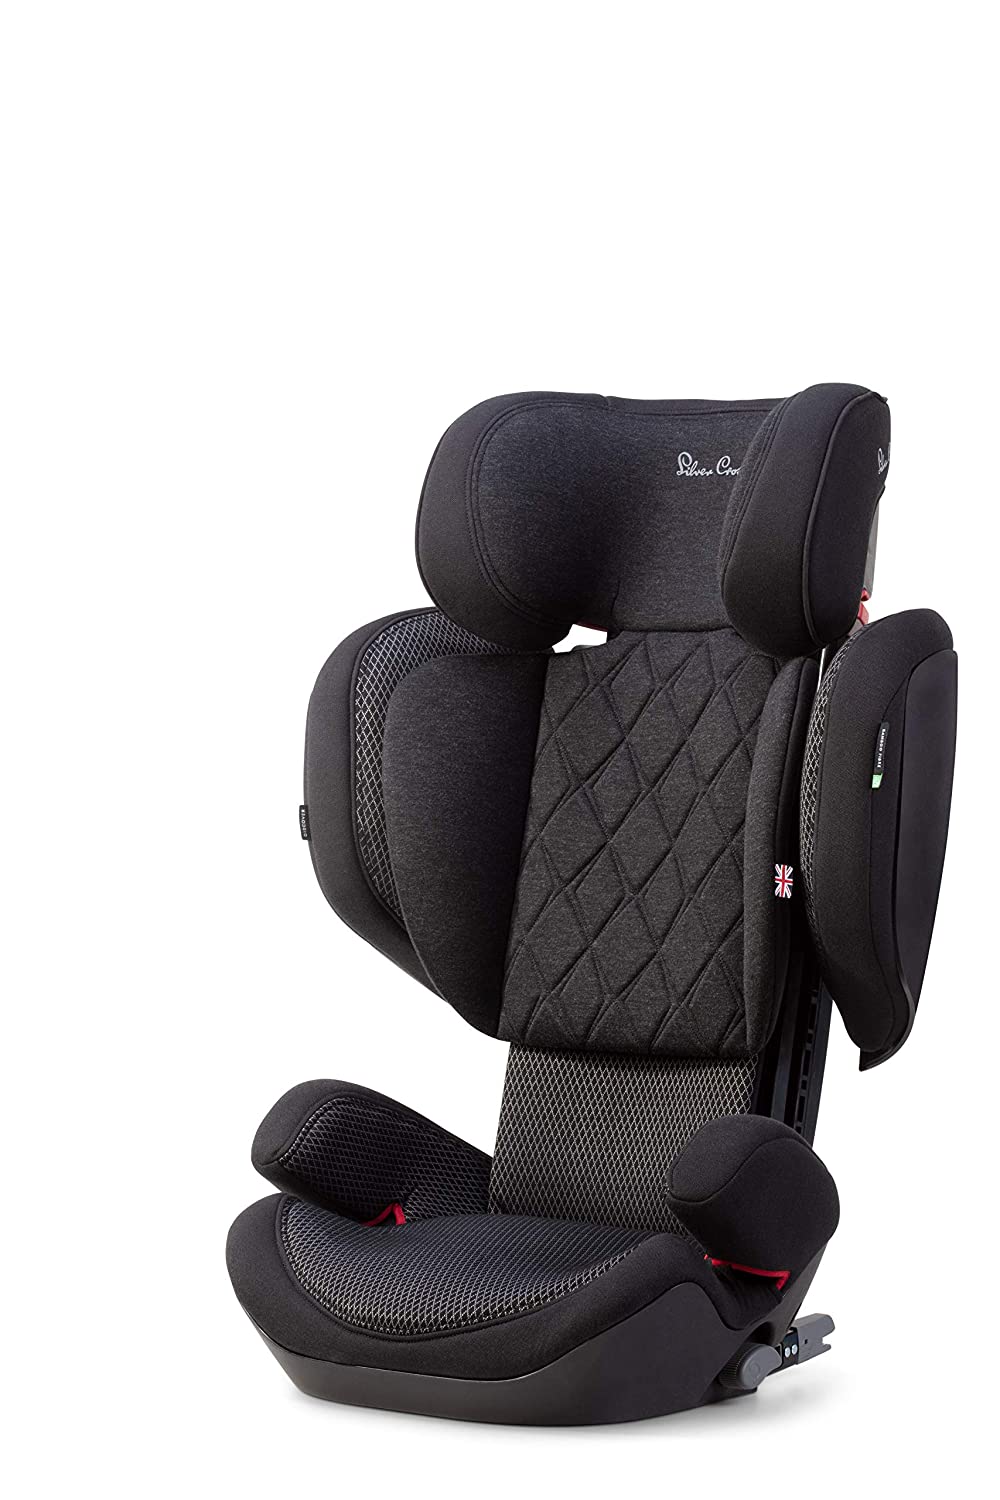 Silver Cross Discover High Back Car Seat Booster Seat for Children from 3 to 12 Years (15 kg to 36 kg) Adjustable ISOFIX Car Seat Group 2/3